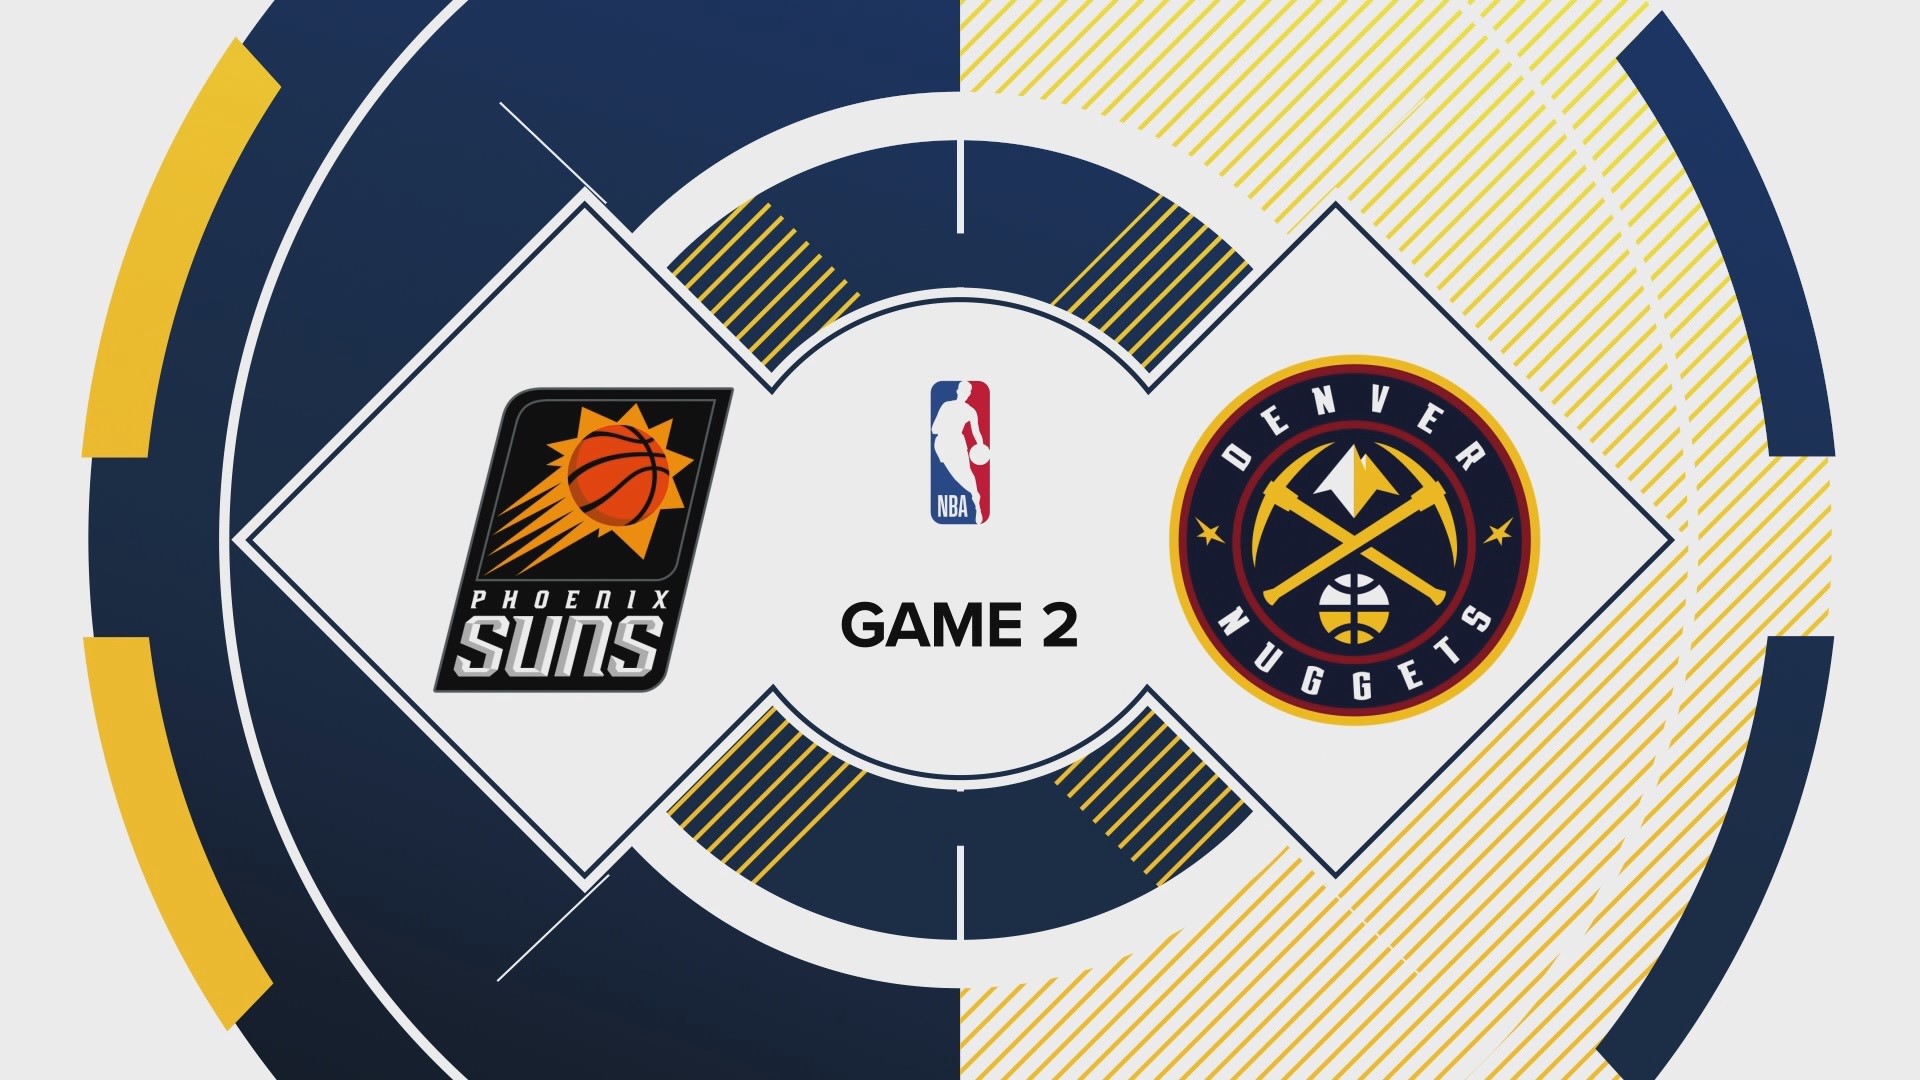 Denver and Phoenix tip off in the second game of the Western Conference semifinals Monday night.